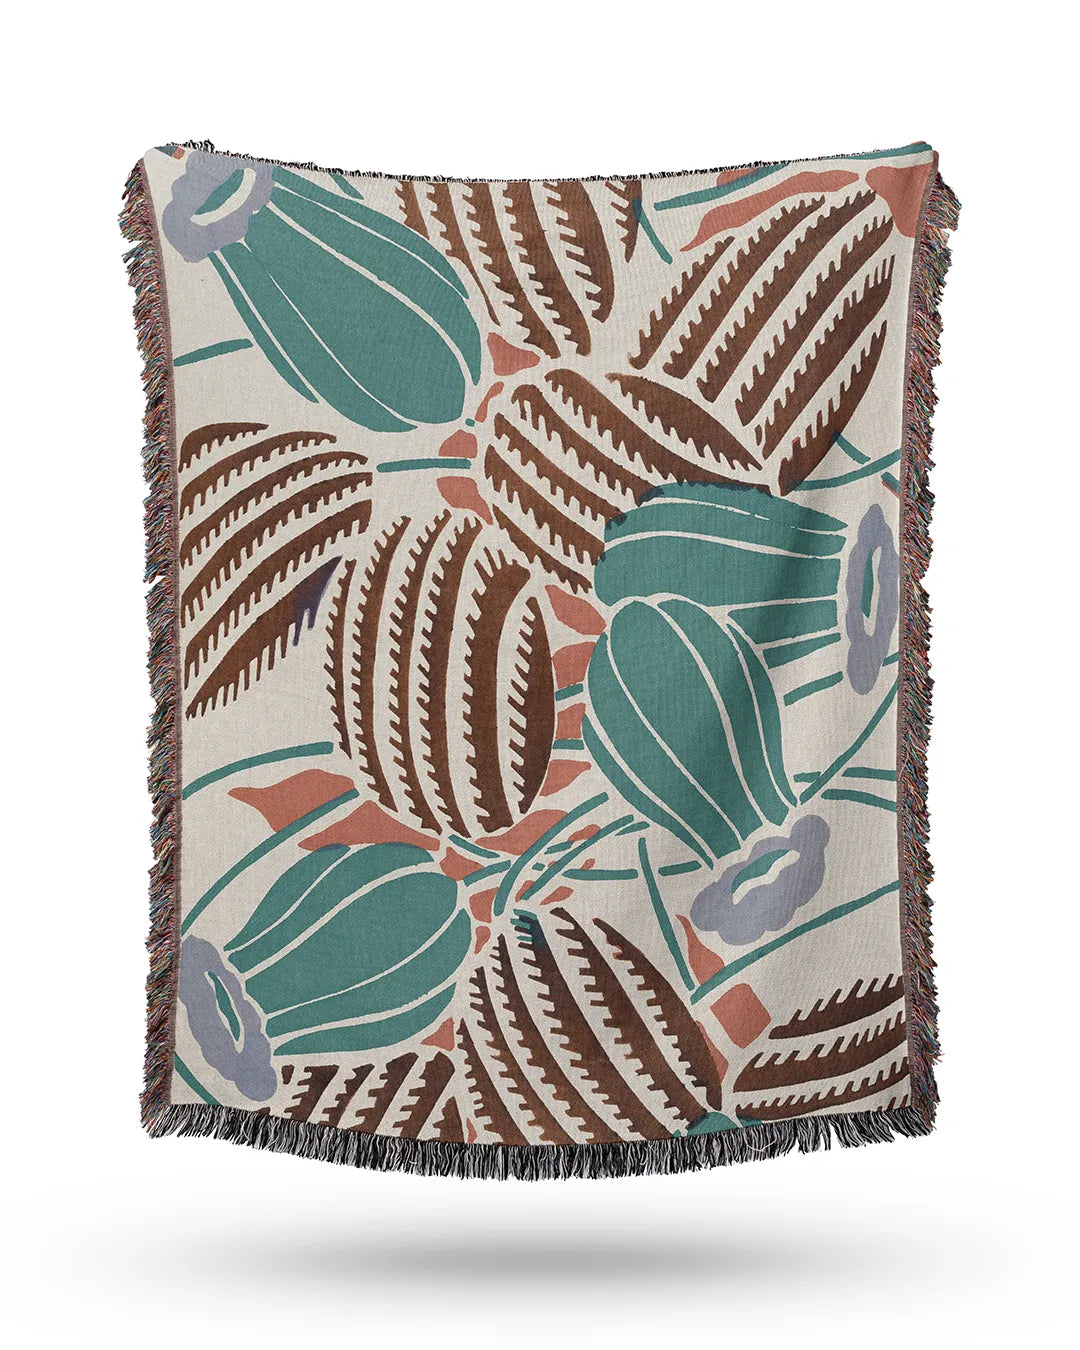 Desert Bloom Cotton Woven Throw Blanket showcasing a unique flowering cactus pattern in cream, brown, teal, purple, and orange